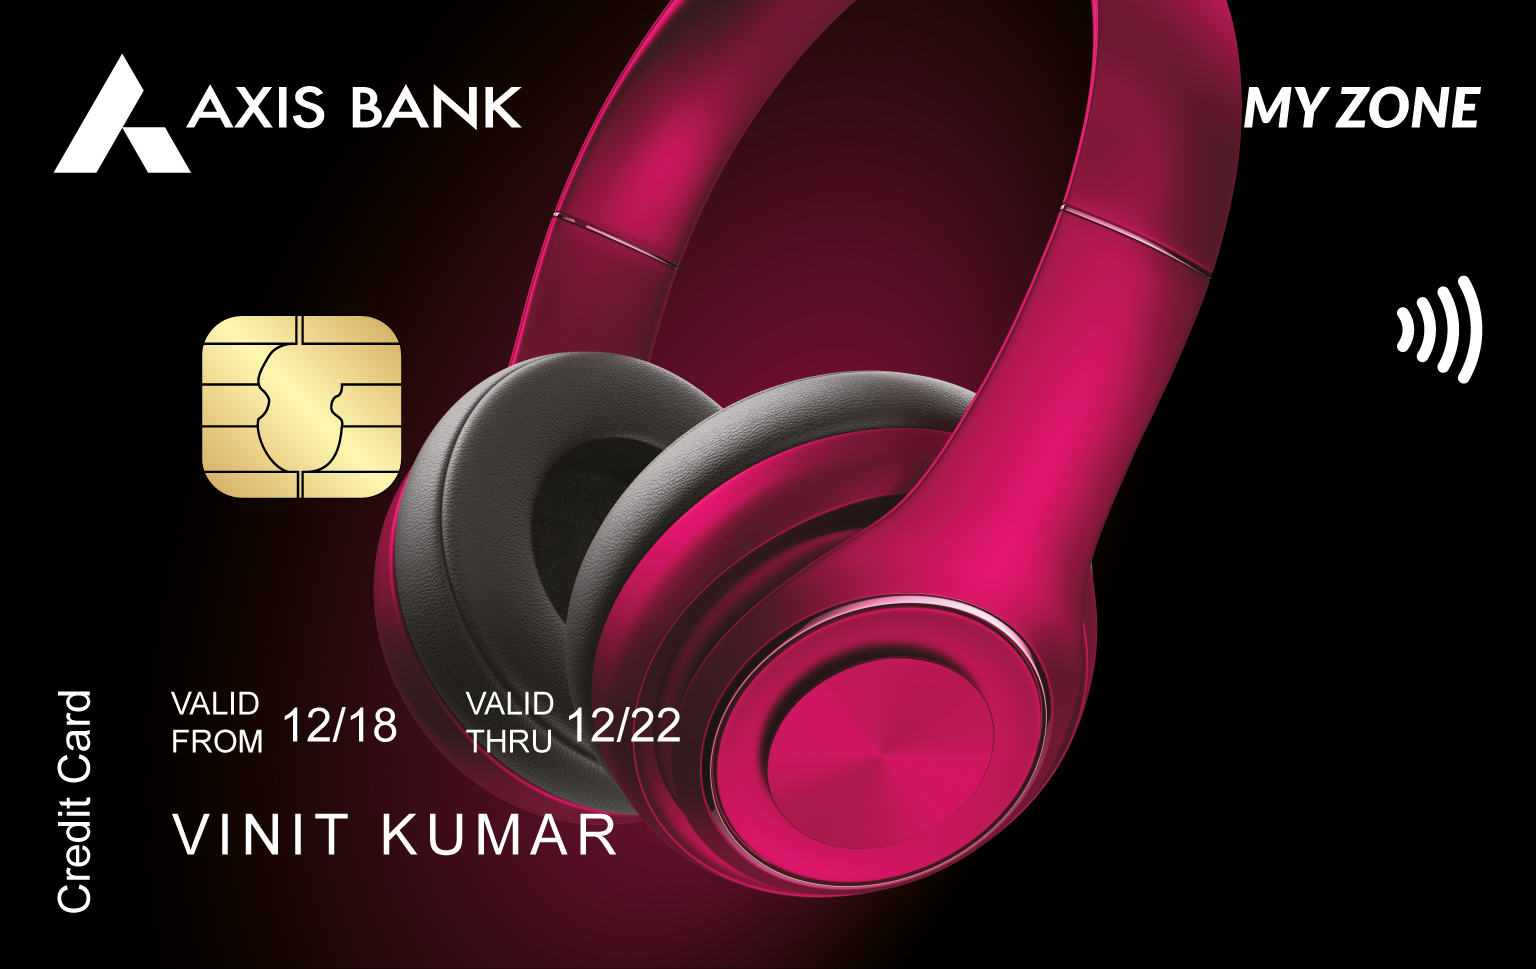 Axis Bank MY Zone Credit Card